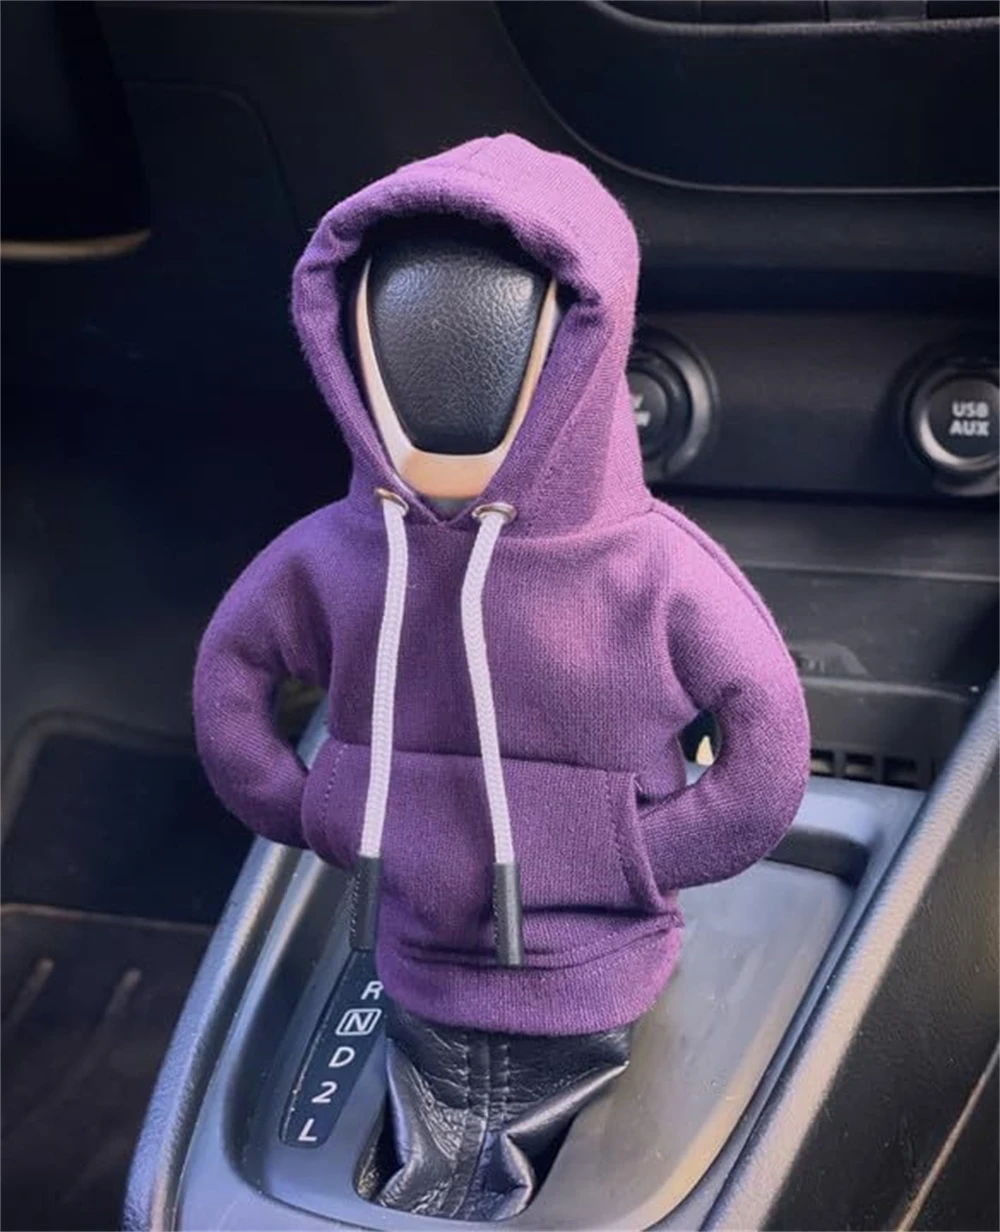 Universal Hoodie Car Gear Car Shift Lever Cover Change Lever Sweatshirt Gearshift Cover Hoodie Gear Knob Sweater Car Decorations